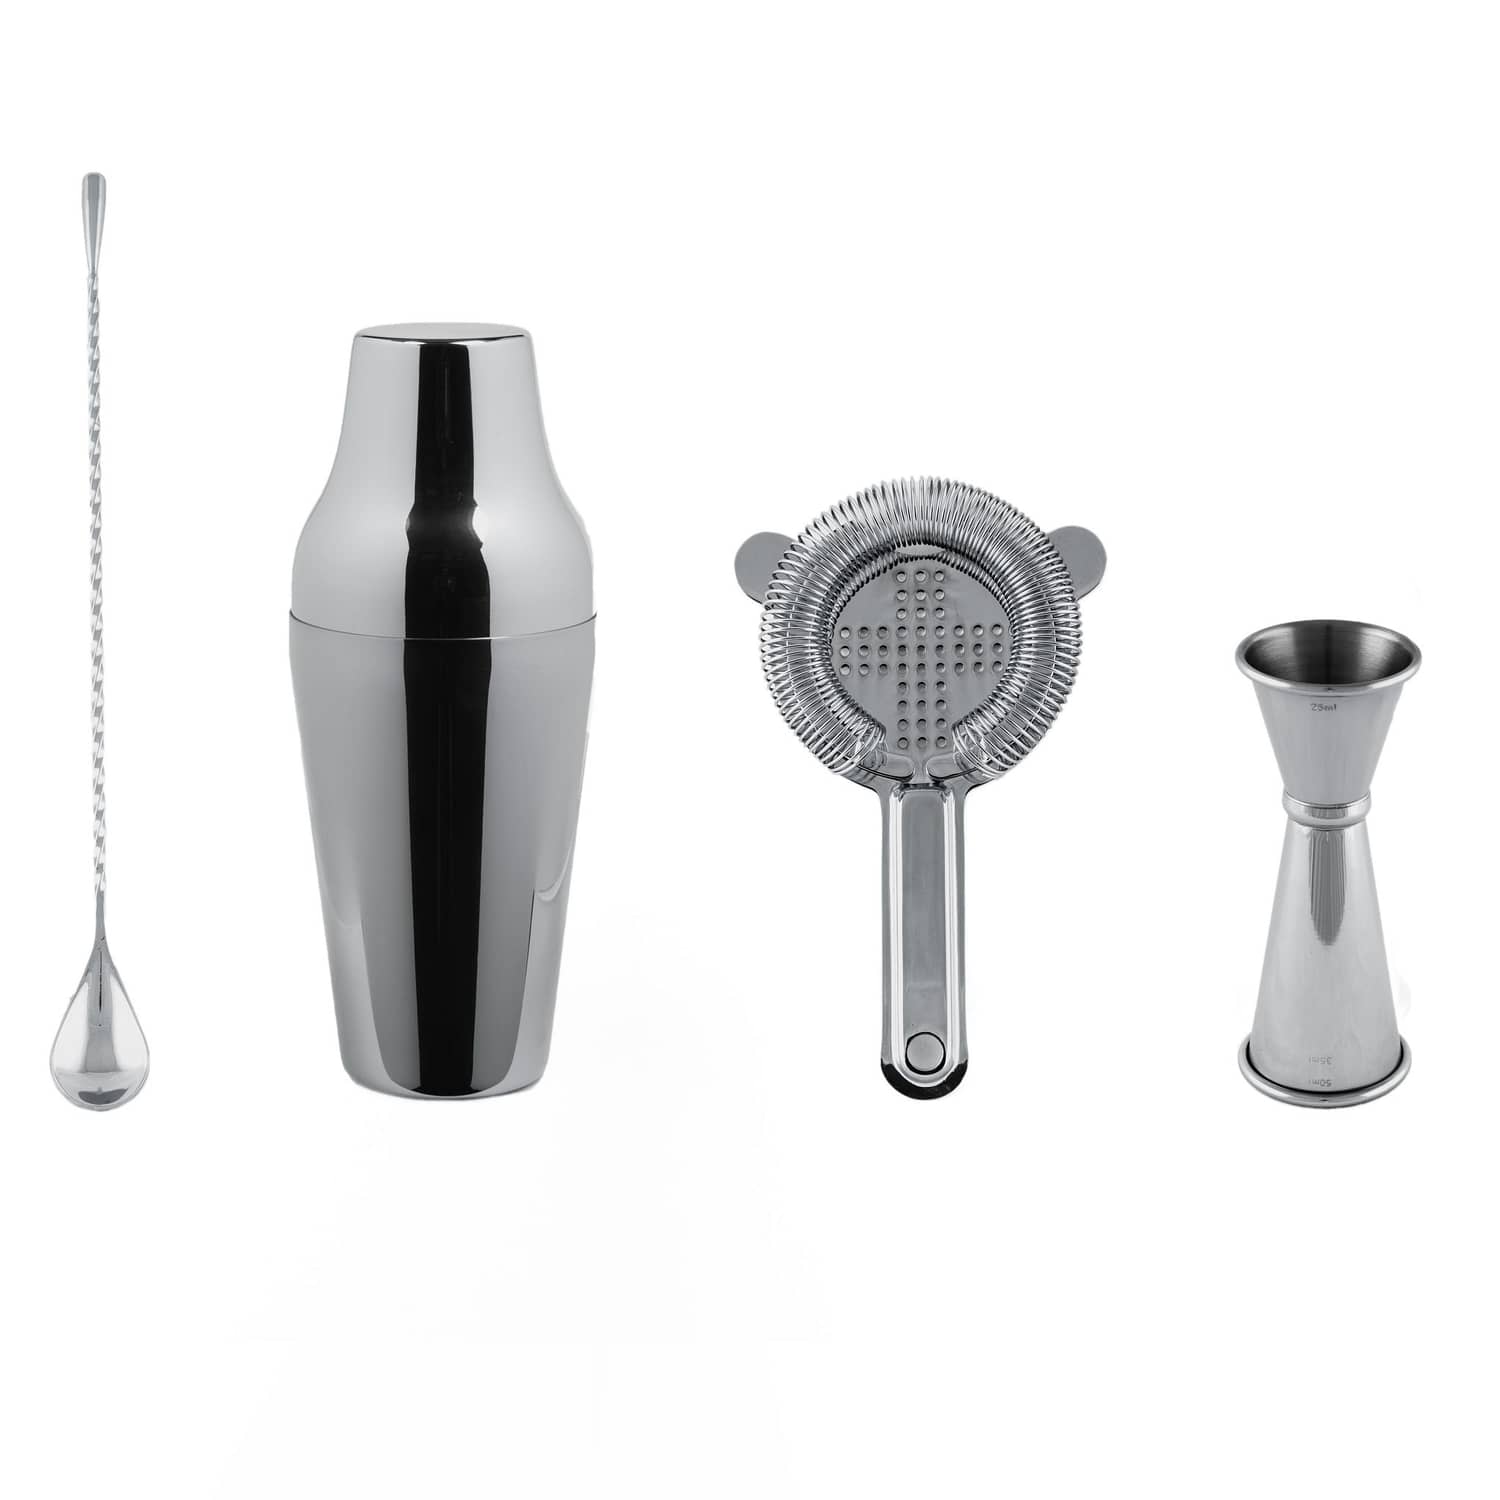 Cocktail Kit, Cocktail Shaker Set, Stainless Steel Barware, Cocktail Bar Tools, The Cocktail Shop, Australia